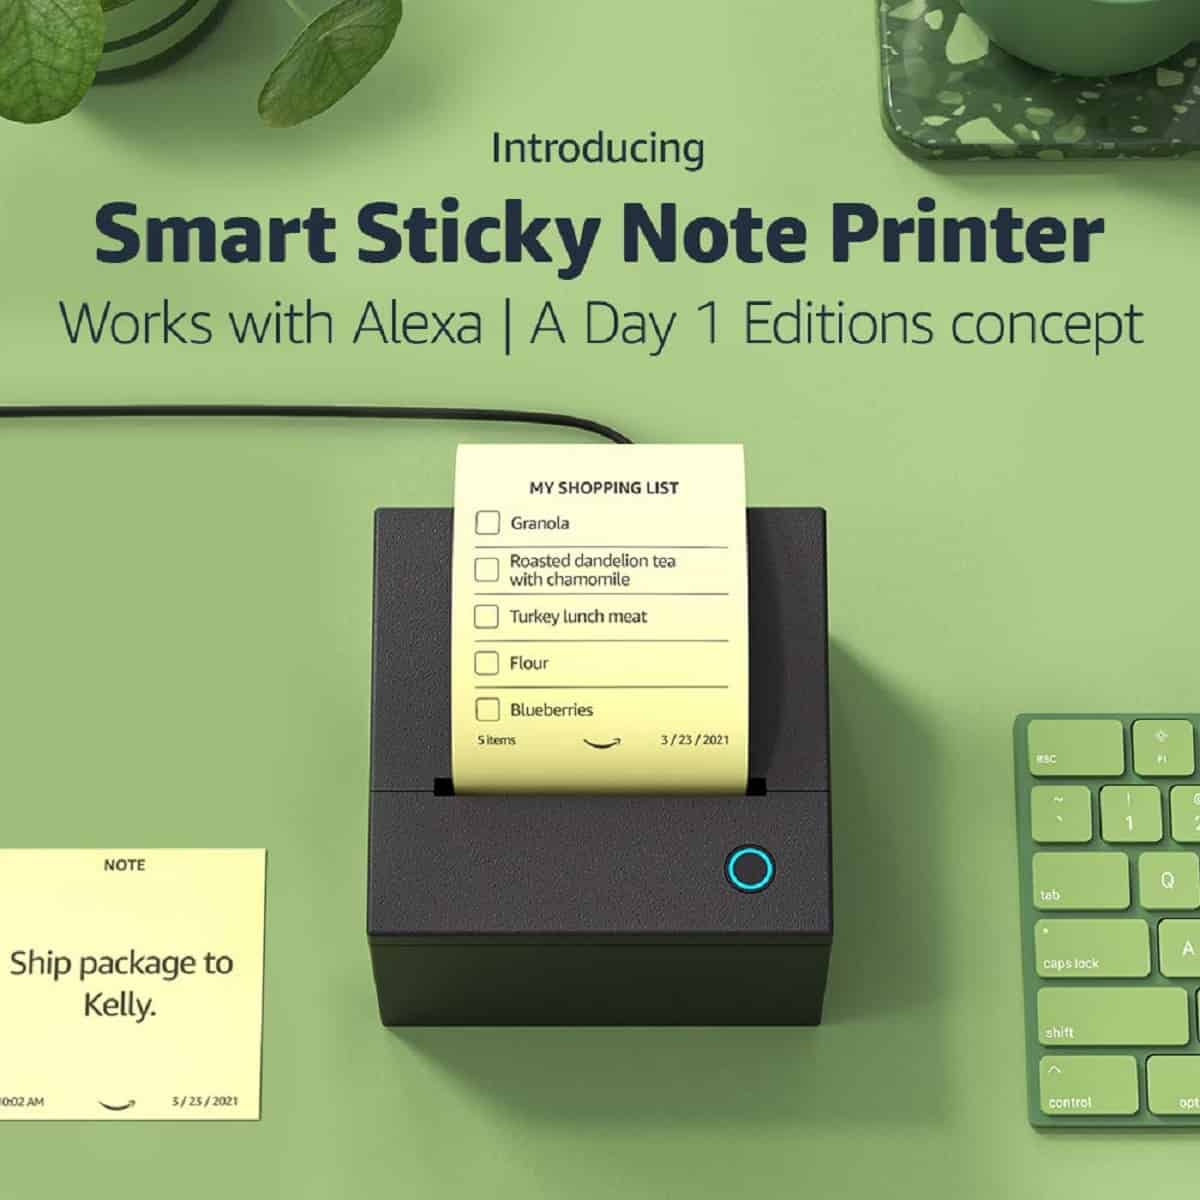 Amazon is releasing an Alexa-powered Sticky Note printer